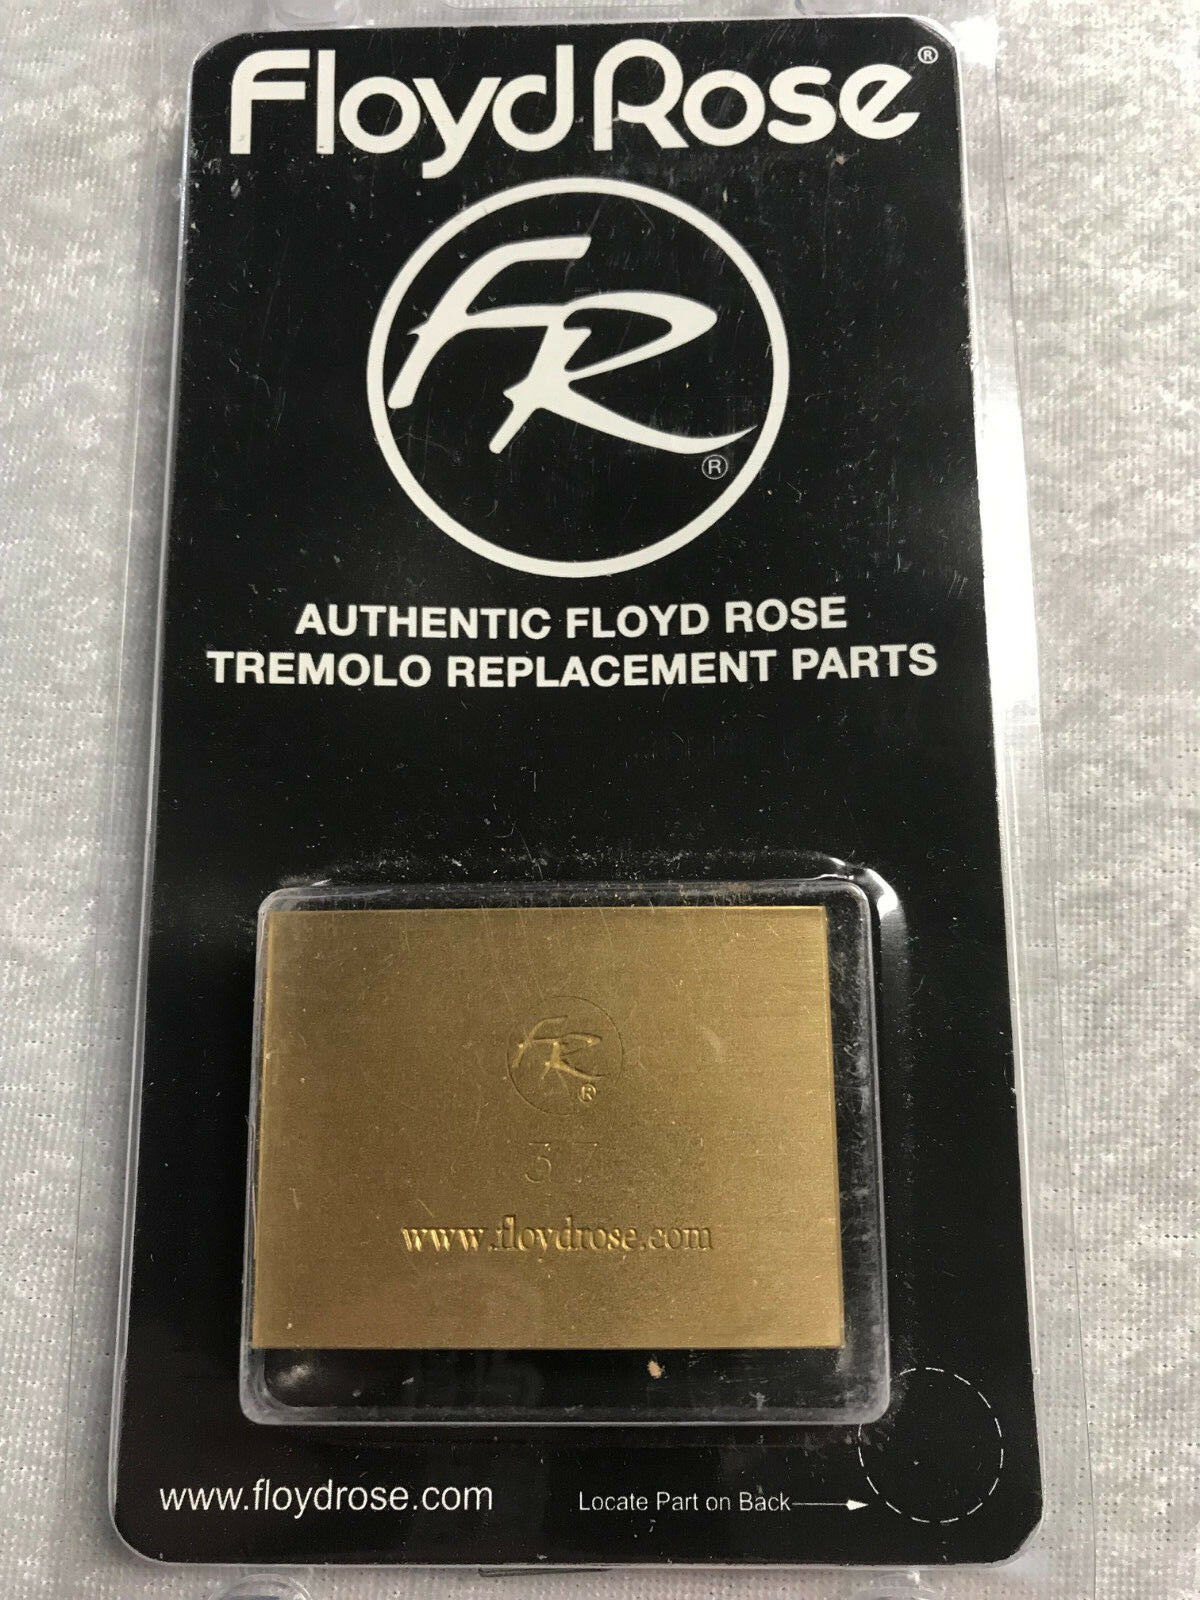 Real Floyd Rose Brand 37mm Fat Brass Block - Made By Floyd Rose For Floyd Rose